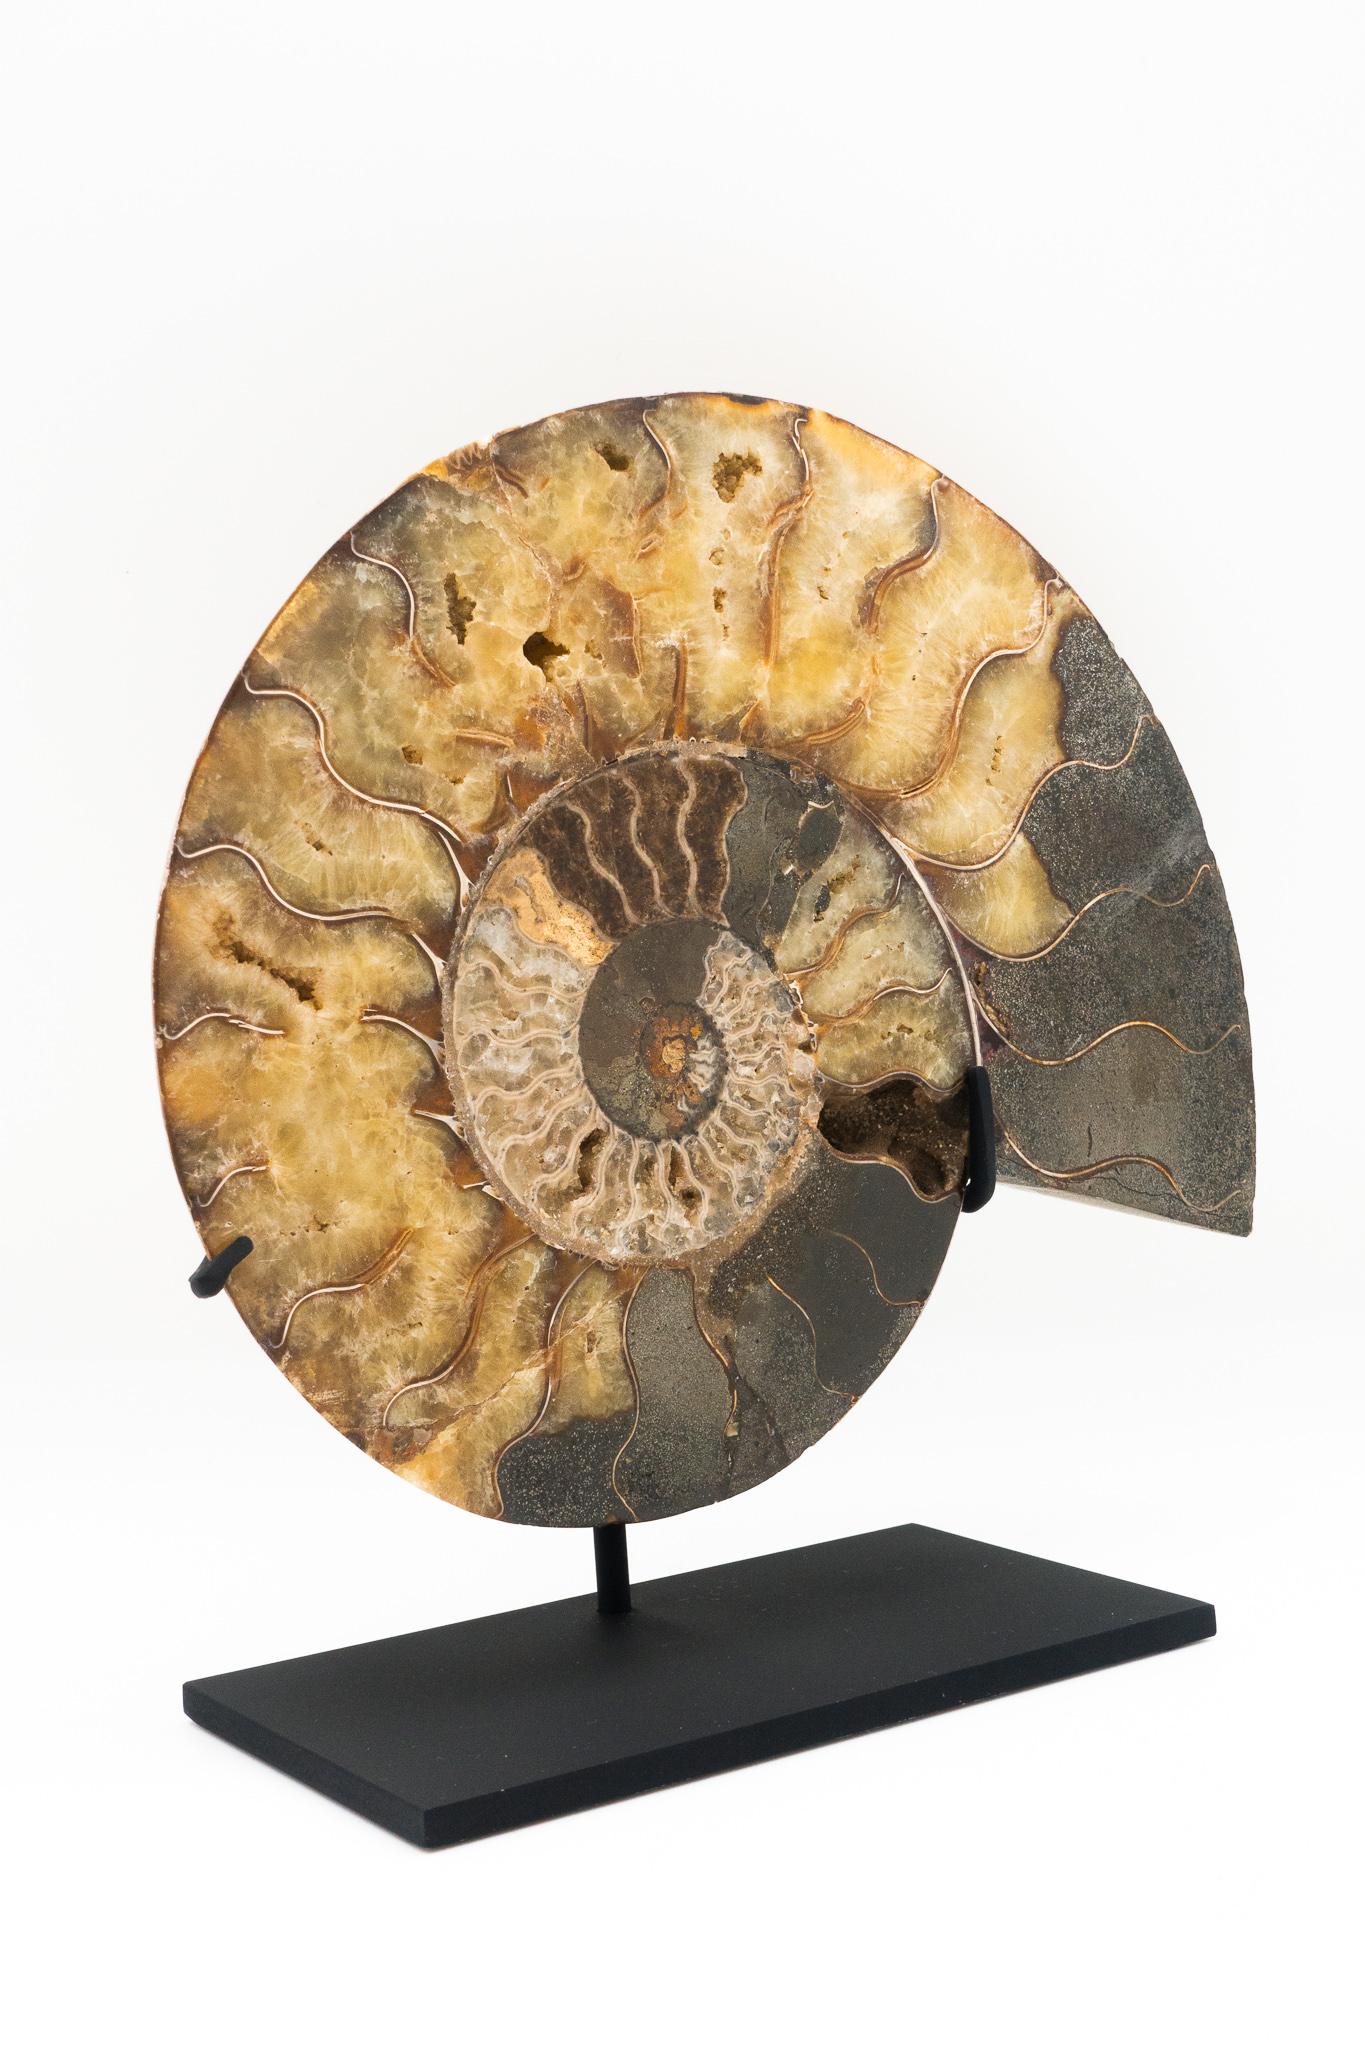 Fossilized ammonite slice mounted on a black metal base. 

Ammonoids are an extinct group of marine mollusk animals closely related to octopuses, squid, and cuttlefish. The name 